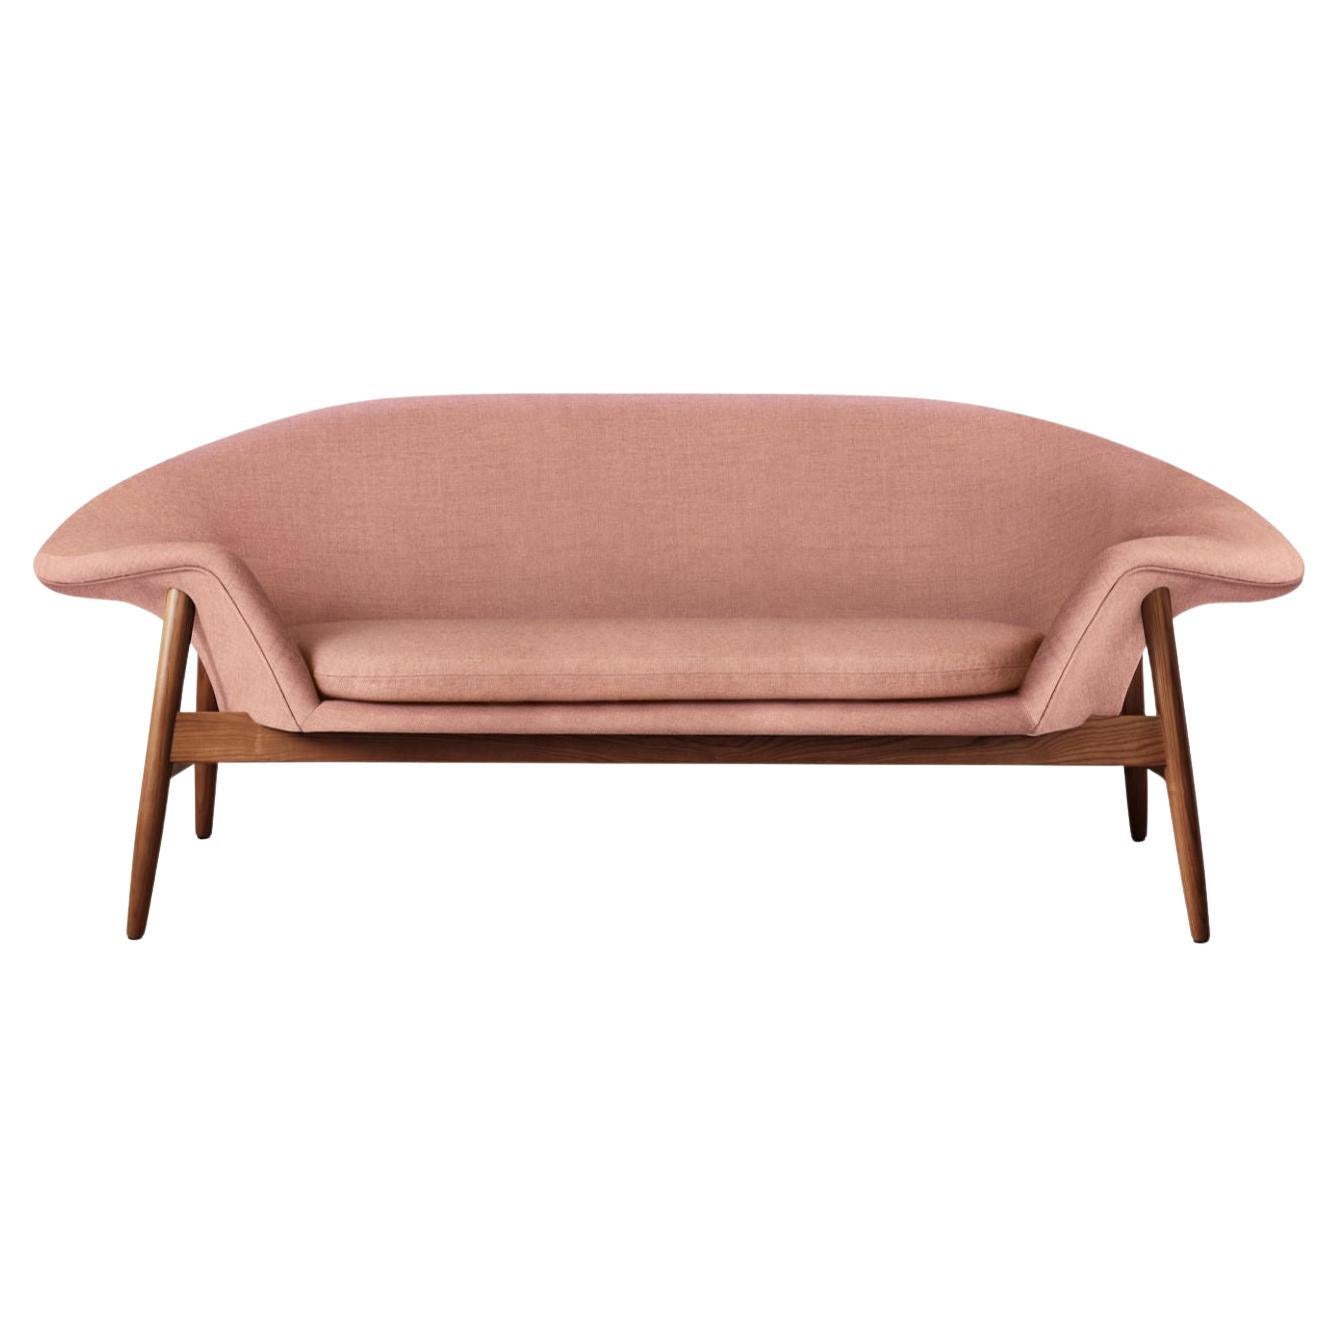 Fried Egg Sofa Pale Rose by Warm Nordic